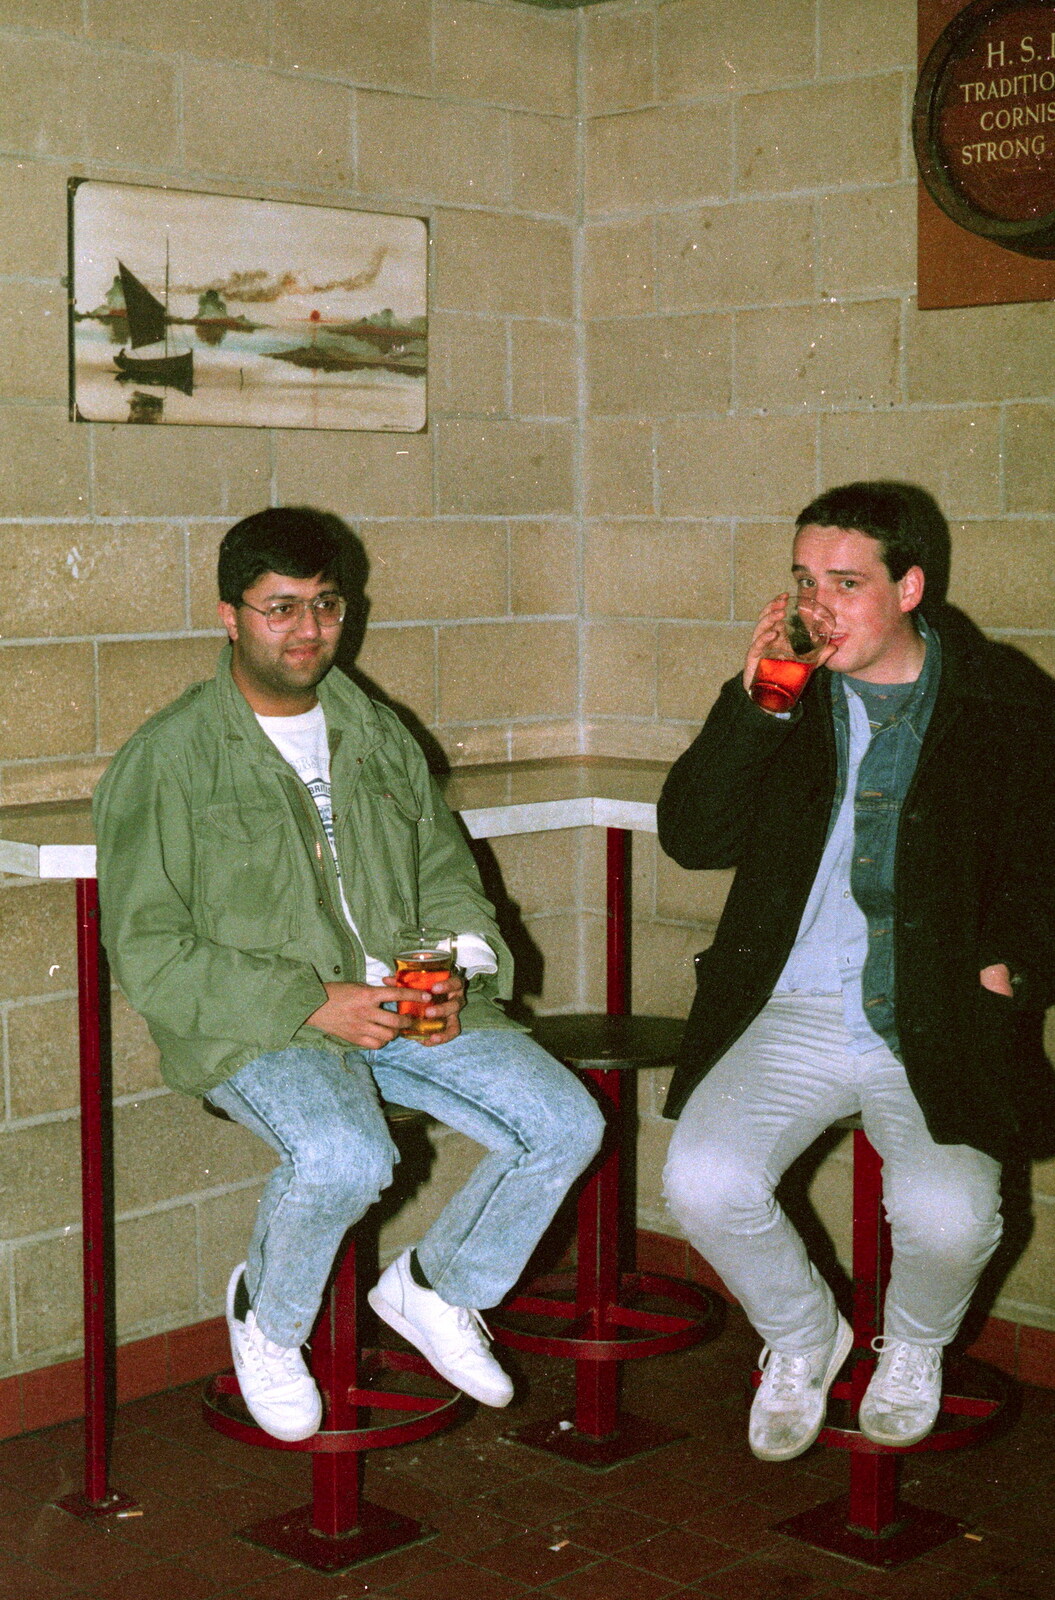 Frank Sembi and his mate from Uni: Scenes of Plymouth and the PPSU Bar, Plymouth Polytechnic, Devon - 28th April 1986